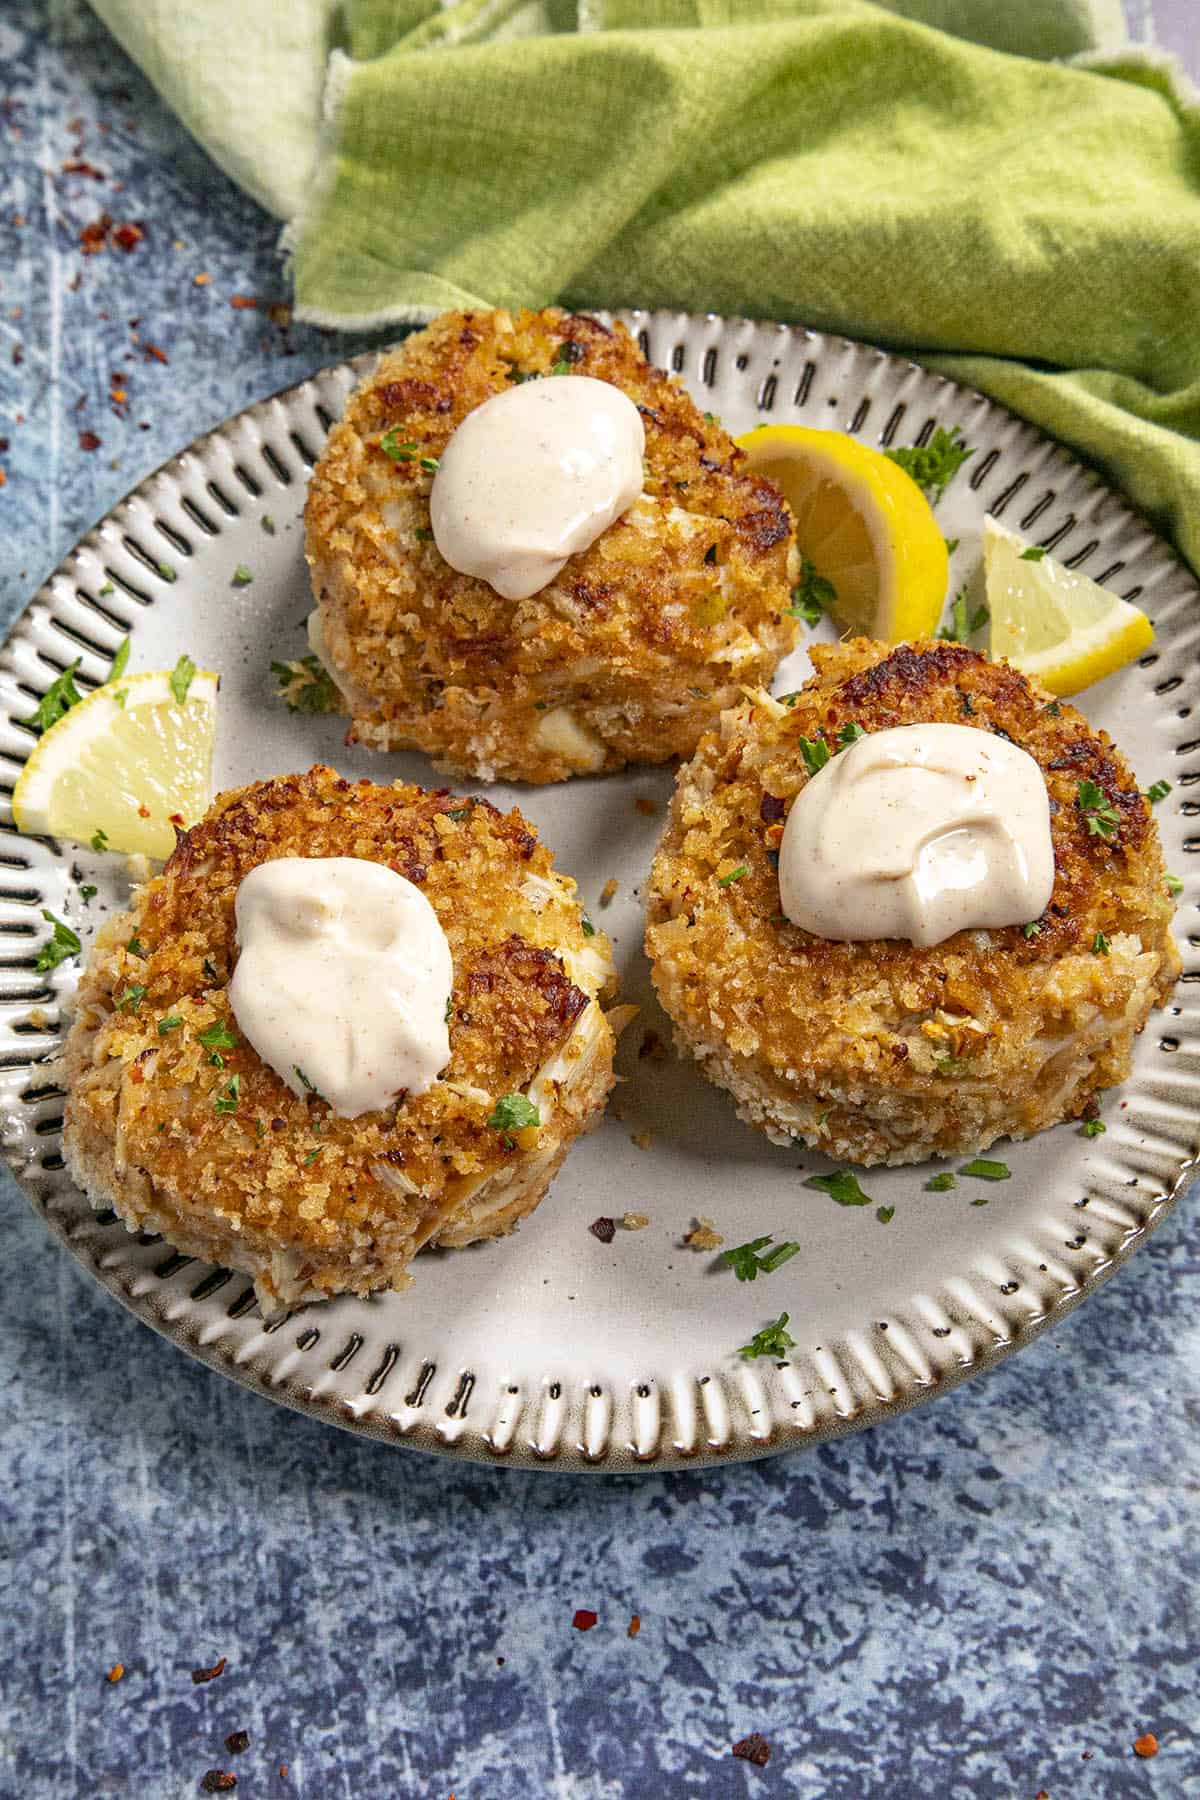 3 Crab cakes with creamy crab cake sauce on a plate for serving